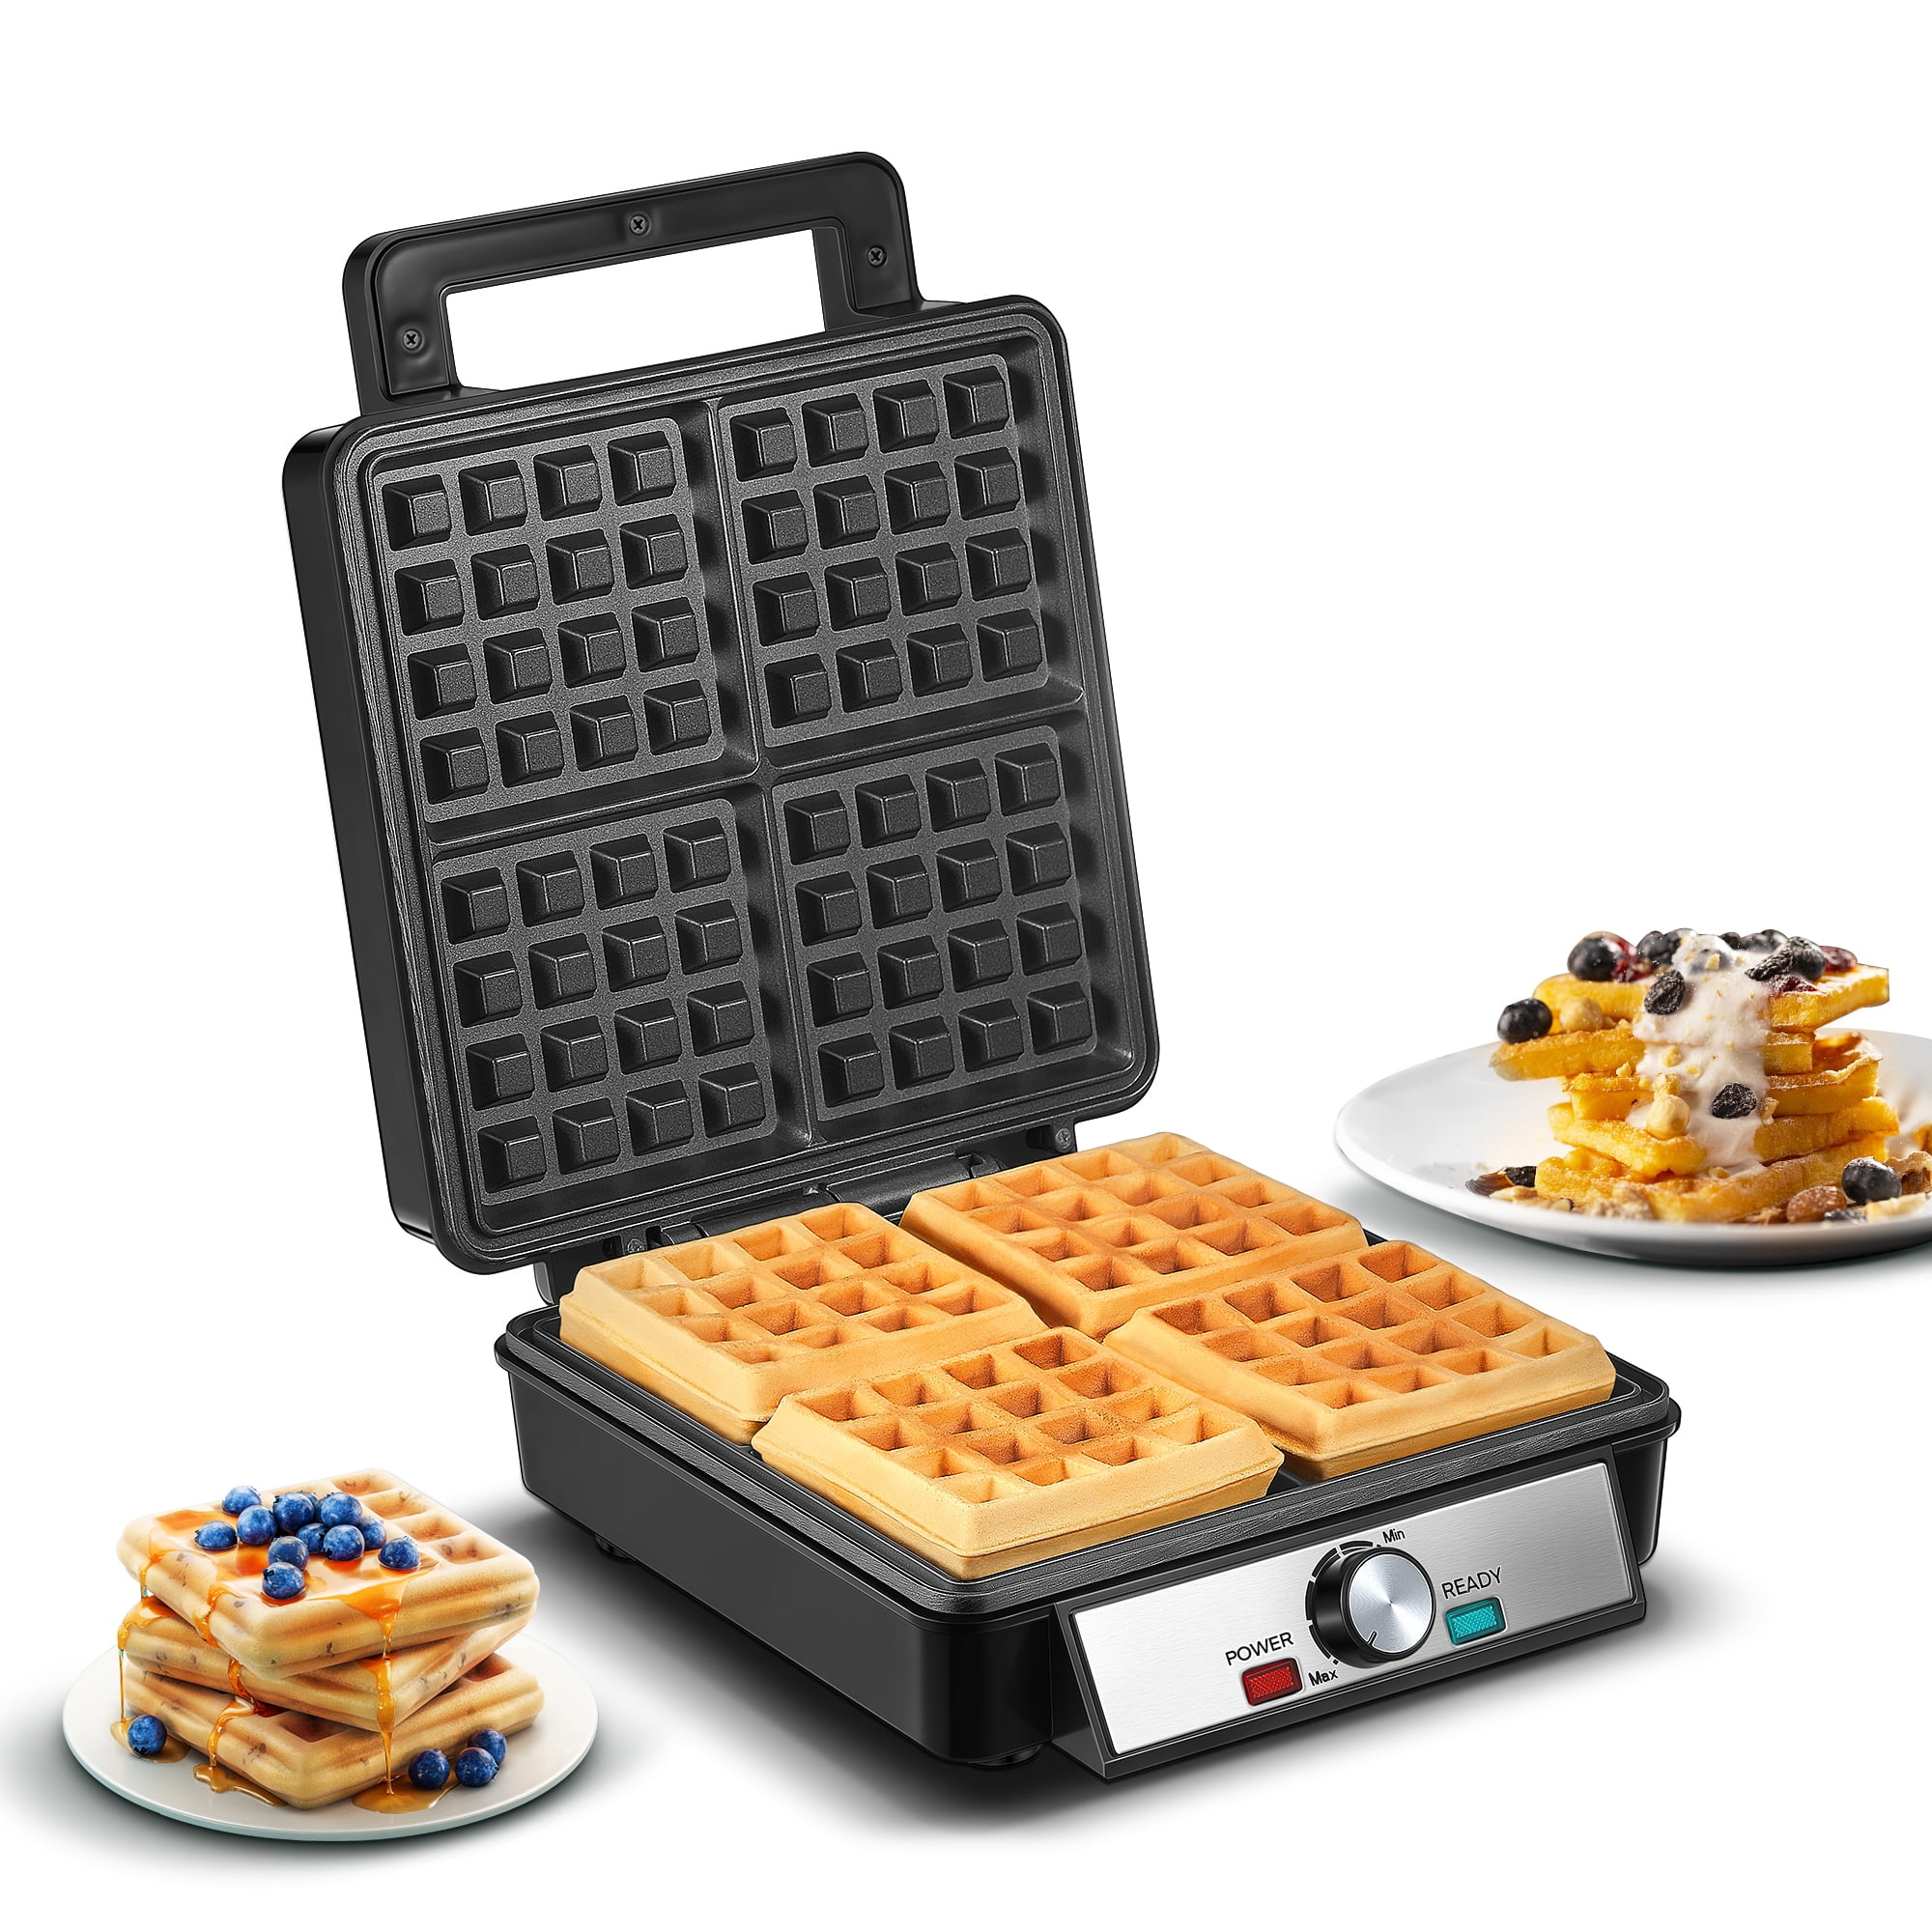 BELLA Classic Belgian Waffle Maker, 7 Round, Non Stick, Waffle Iron Makes  1” Thick Waffles, Variable browning control knob, Stay-cool handle with